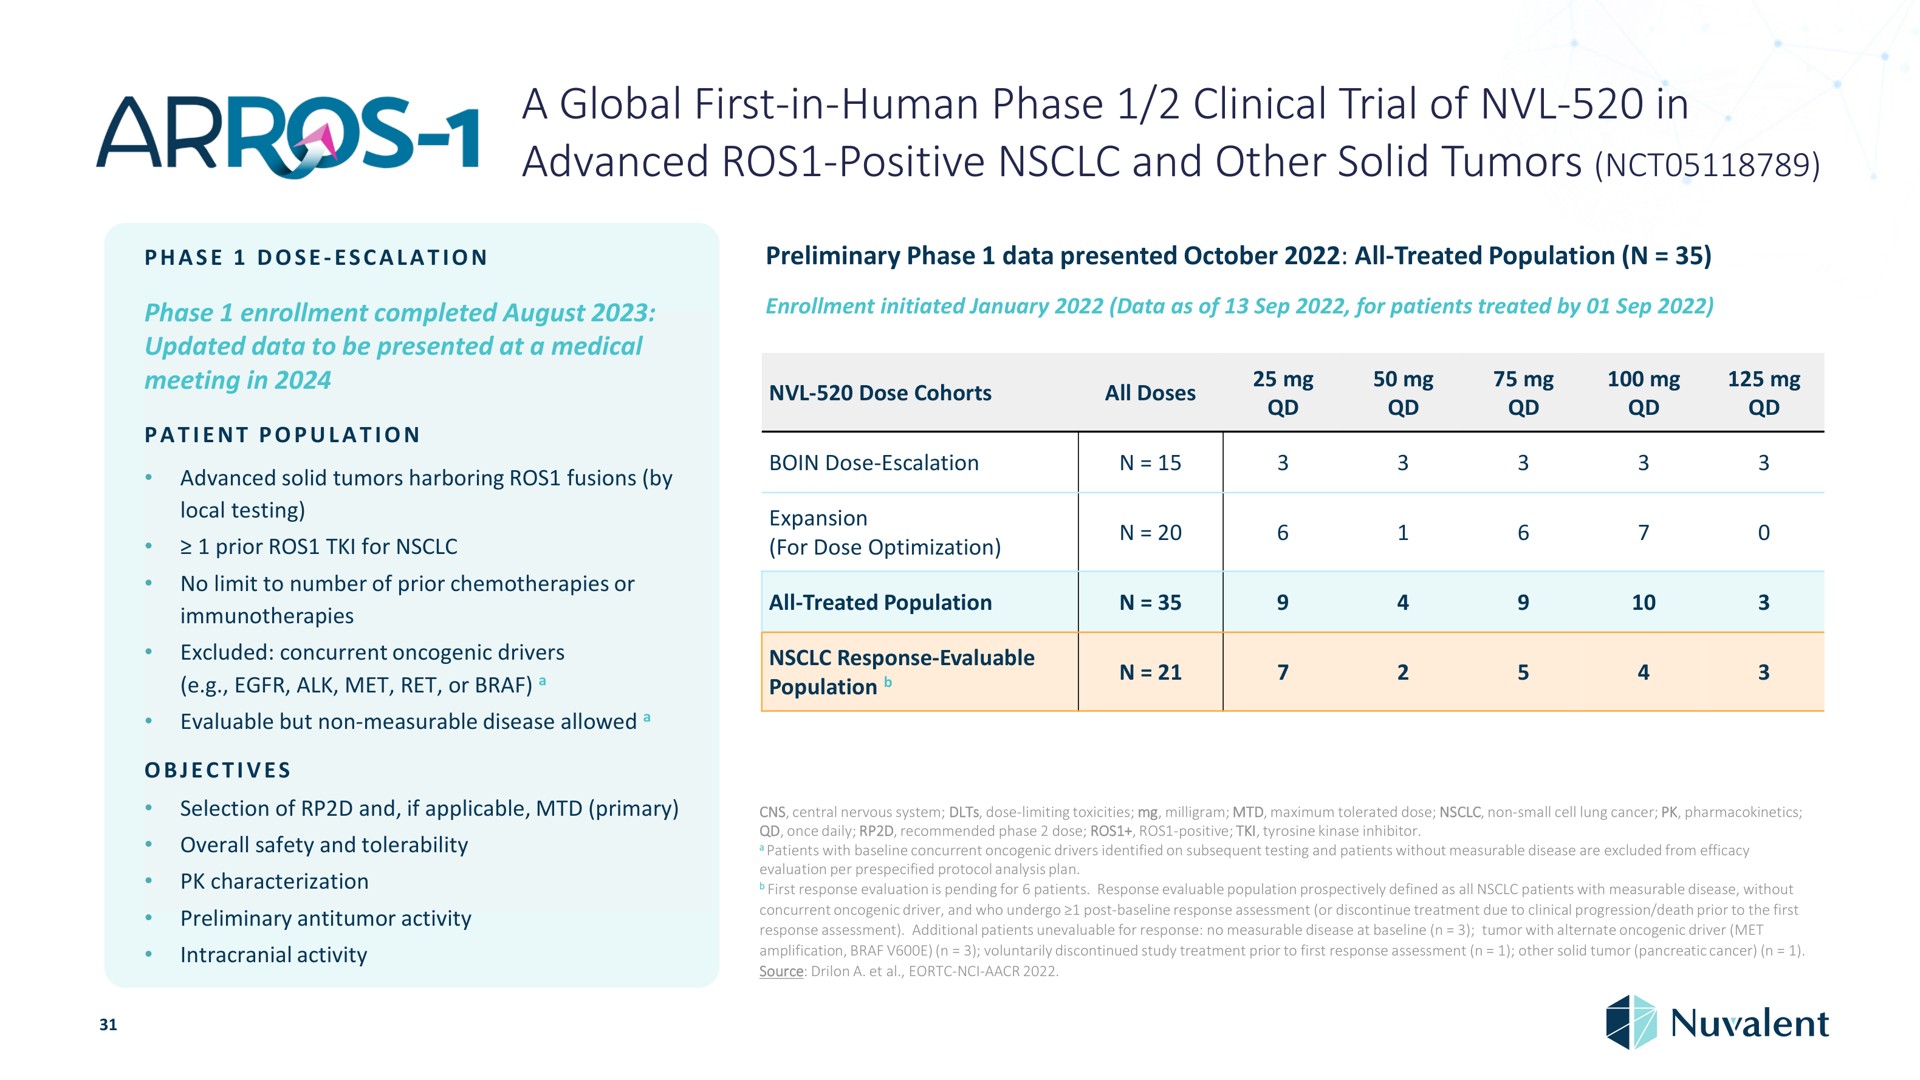 a global first in human phase clinical trial of in advanced positive and other solid tumors dose preliminary data presented all treated population enrollment completed august updated data to be presented at medical meeting patient population harboring fusions by local testing prior for no limit to number prior chemotherapies or excluded concurrent drivers alk met ret or evaluable but non measurable disease allowed objectives selection if applicable primary overall safety tolerability characterization preliminary activity intracranial activity enrollment initiated data as for patients treated by dose cohorts all doses dose expansion for dose optimization all treated population response evaluable population need i central nervous system dose limit once daily recommended patients with concurrent evaluation per toxicities milligram maximum tolerated tyrosine kinase identified on subsequent testing patients without measurable disease are excluded from efficacy ose non small cell lung cancer first response evaluation is pending response evaluable population prospectively defined as all patients with measurable disease without concurrent treatment due to progression death prior to the first tumor with altern driver met discontinued study treatment prior to first assessment tumor pancreatic cancer | Nuvalent